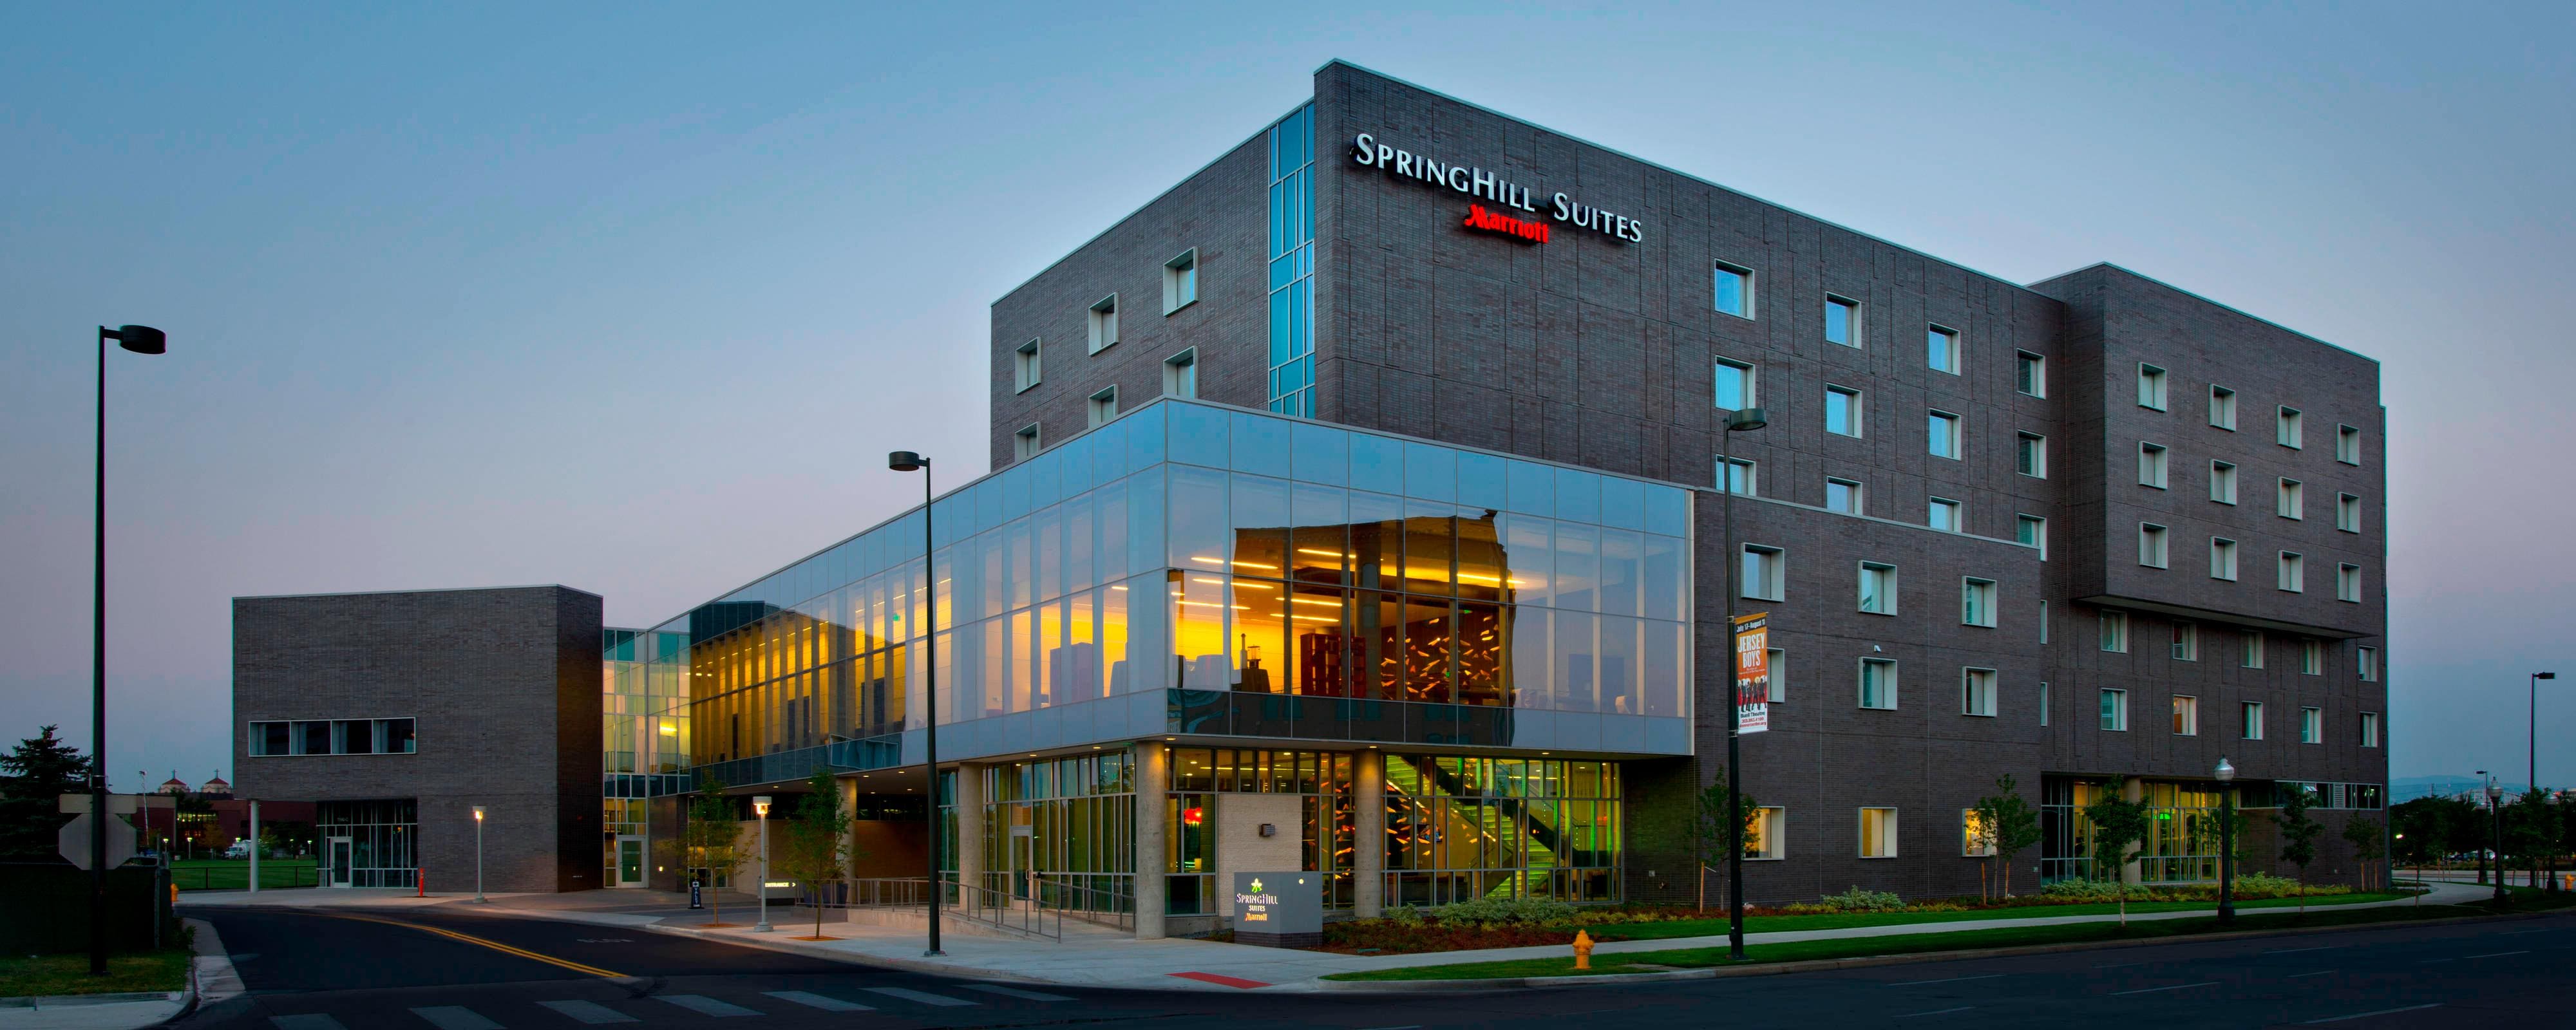 Welcome To The Springhill Suites By Marriott Denver Downtown Hotel